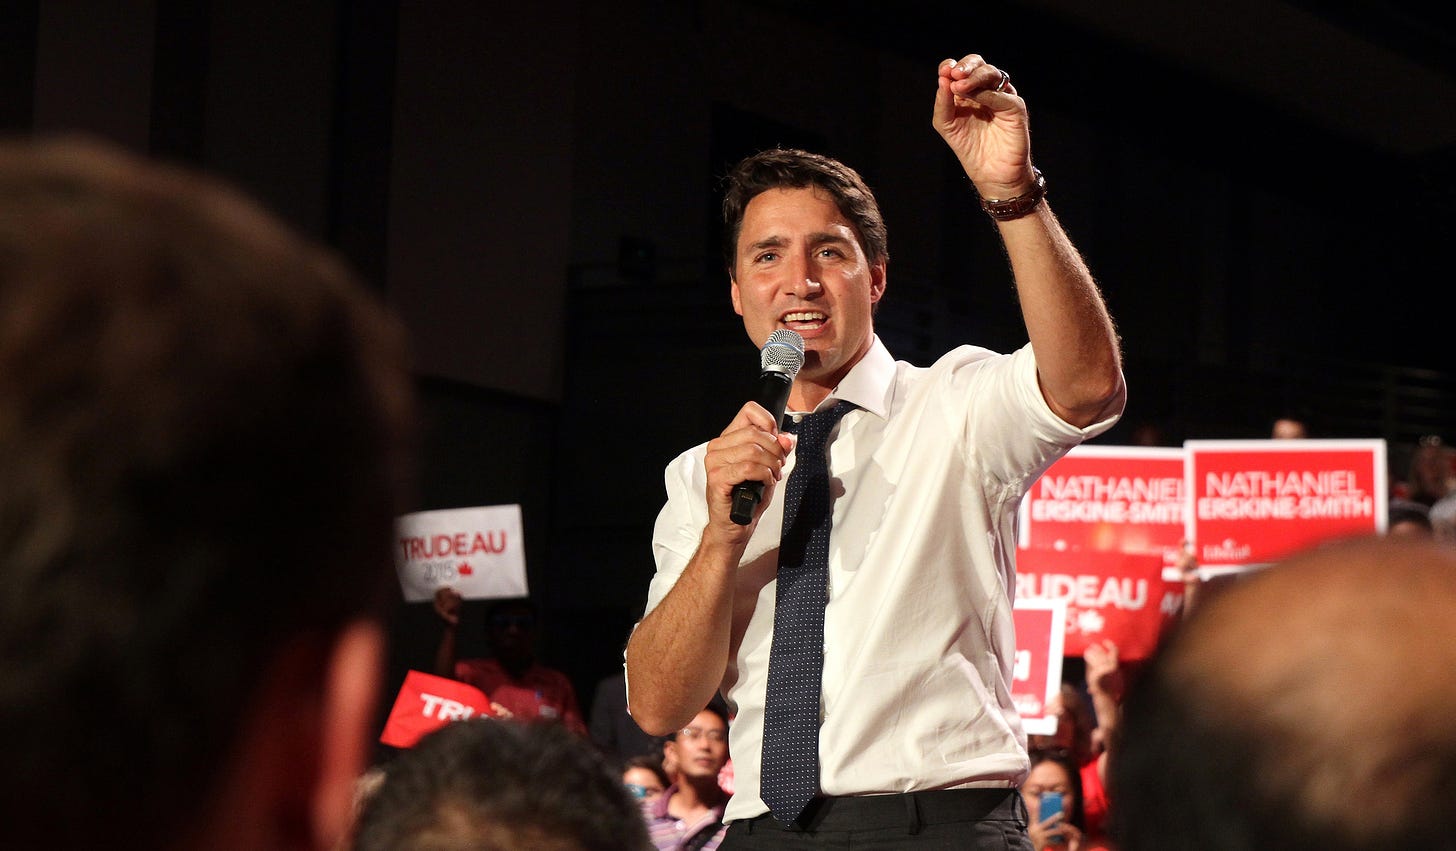 Justin Trudeau raises his hand and holds a mic at a campaign rally with Liberal signs in the background.